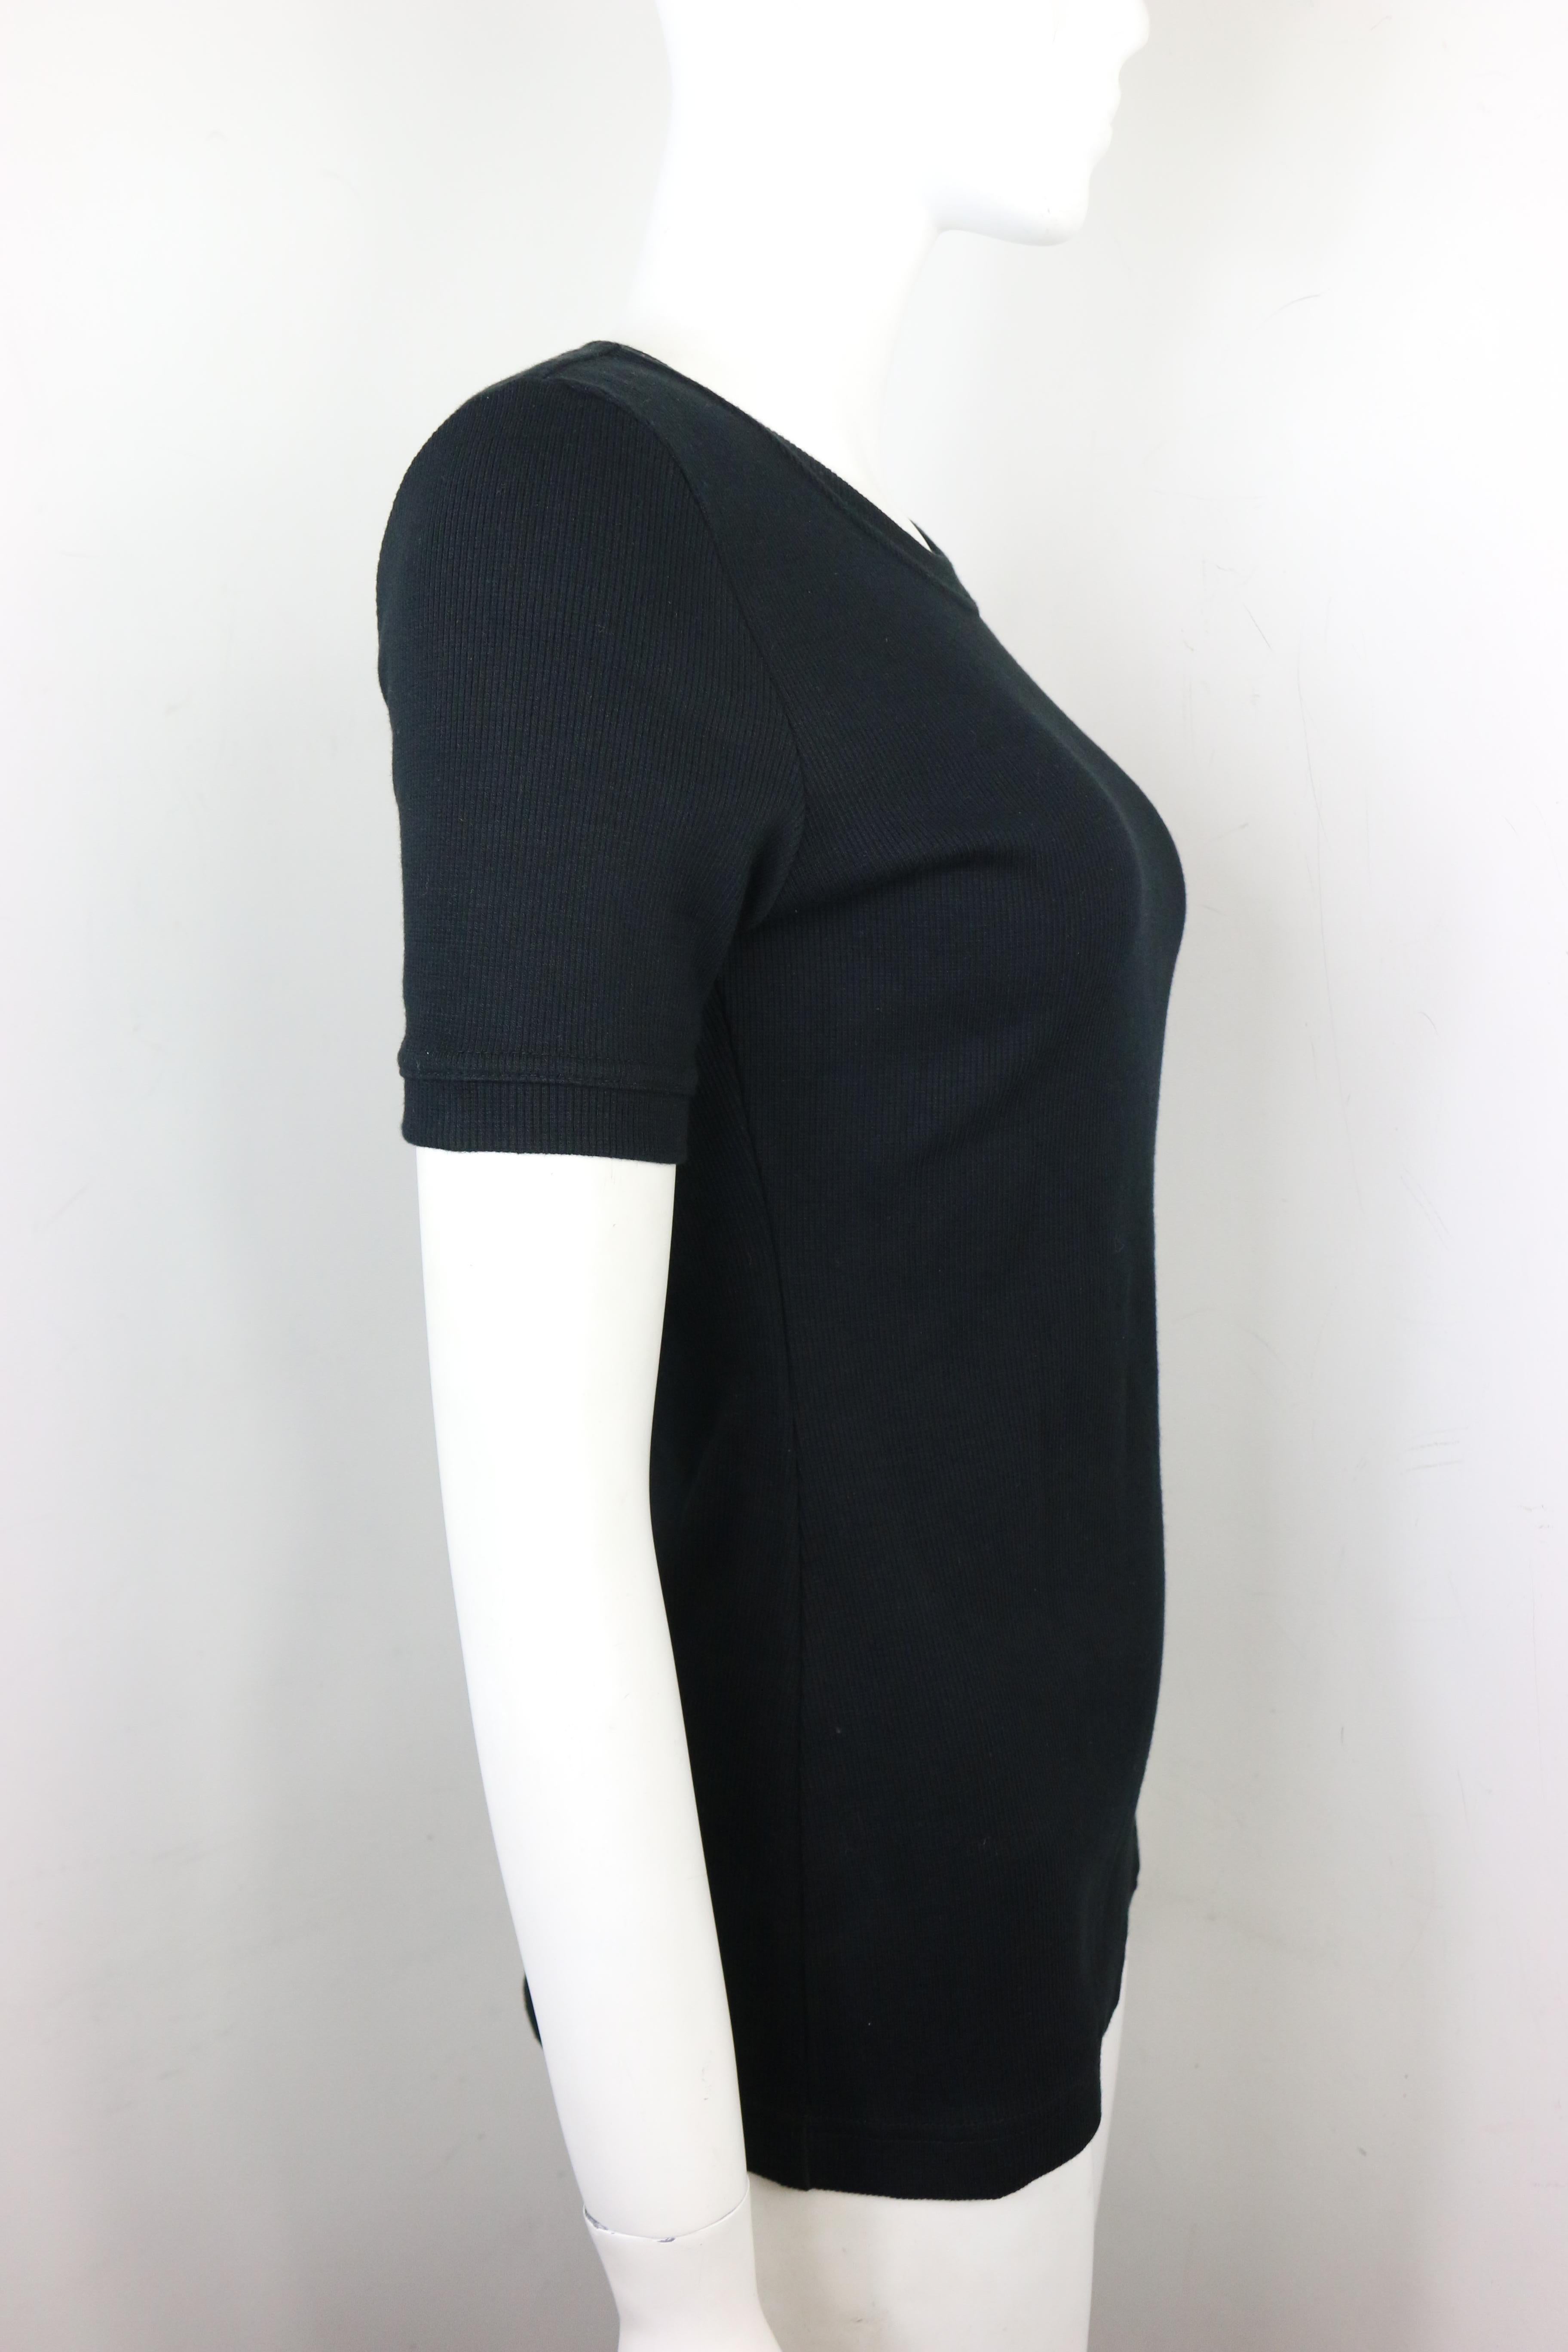 - Vintage Tom Ford for Gucci thick cotton black short sleeves top from 1996 spring collection. 

- Featuring Gucci label on the left sleeve. 

- Ribbed neck, sleeves, and hem. 

- Size L. 

- 85% Cotton, 15% Spandex. 

- Unworn with original tag. 
